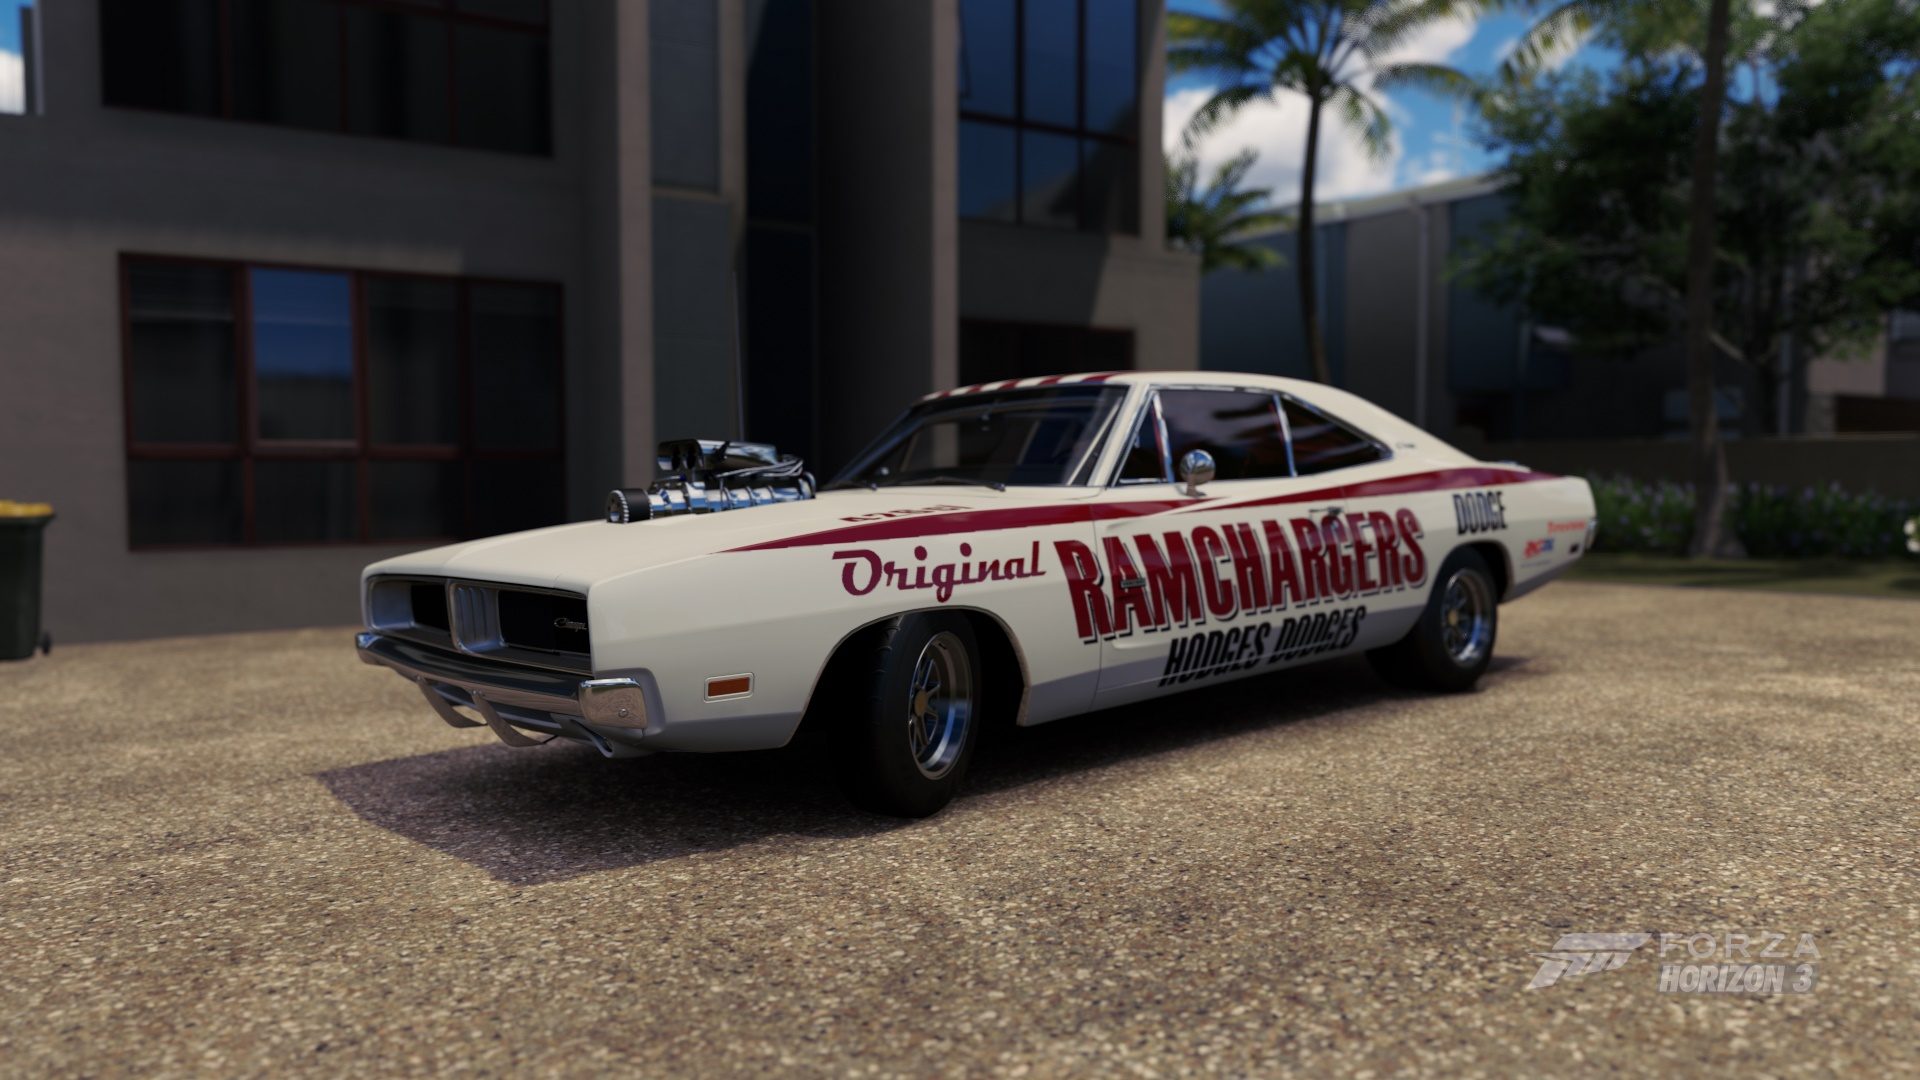 The Ramchargers Dodge